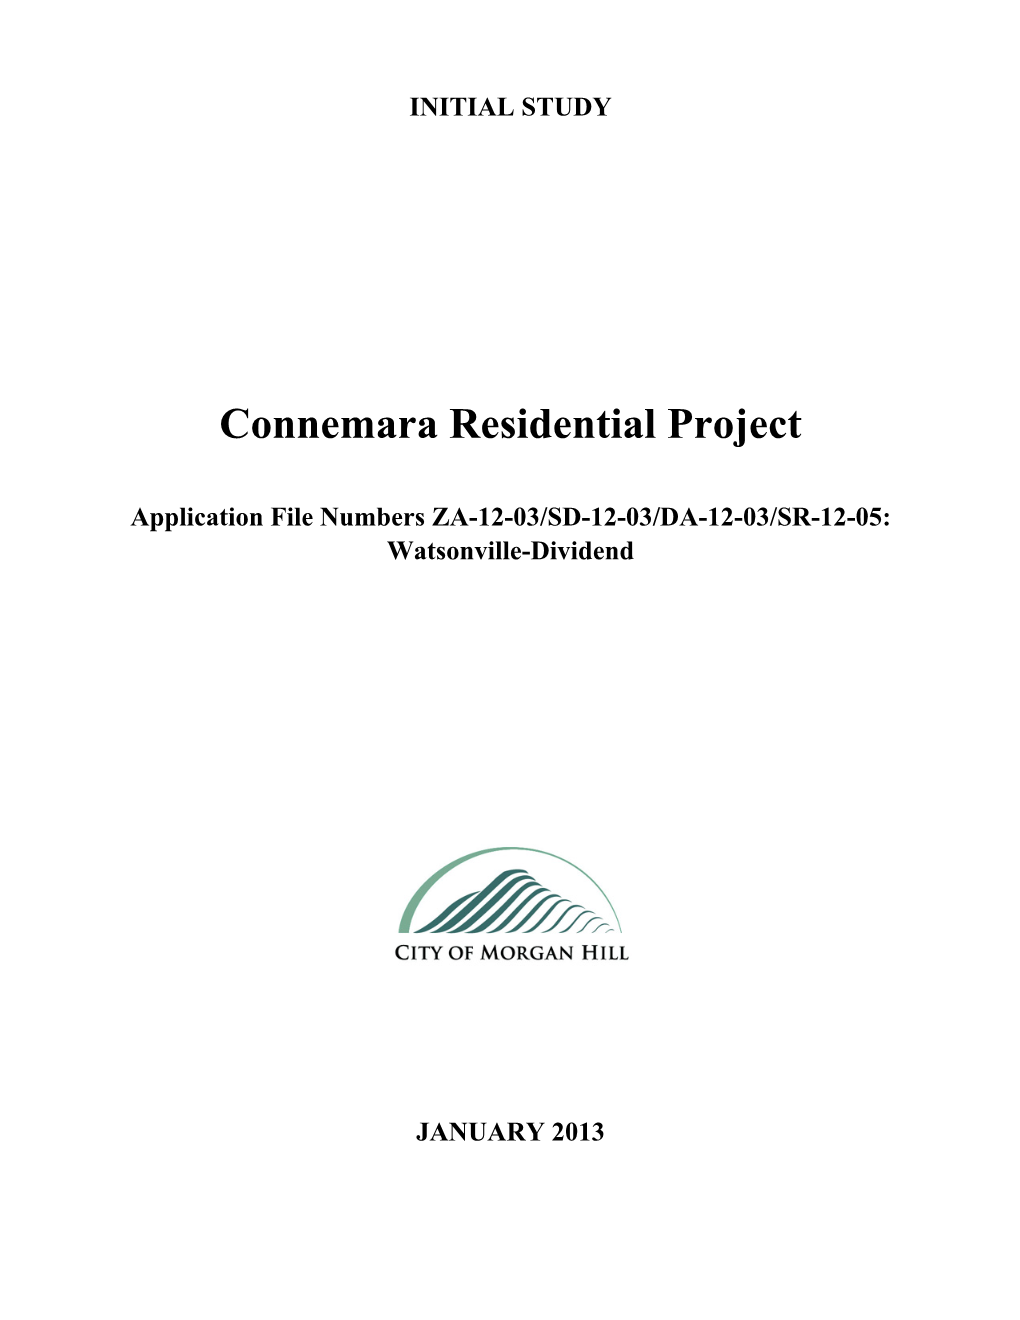 Connemara Residential Project